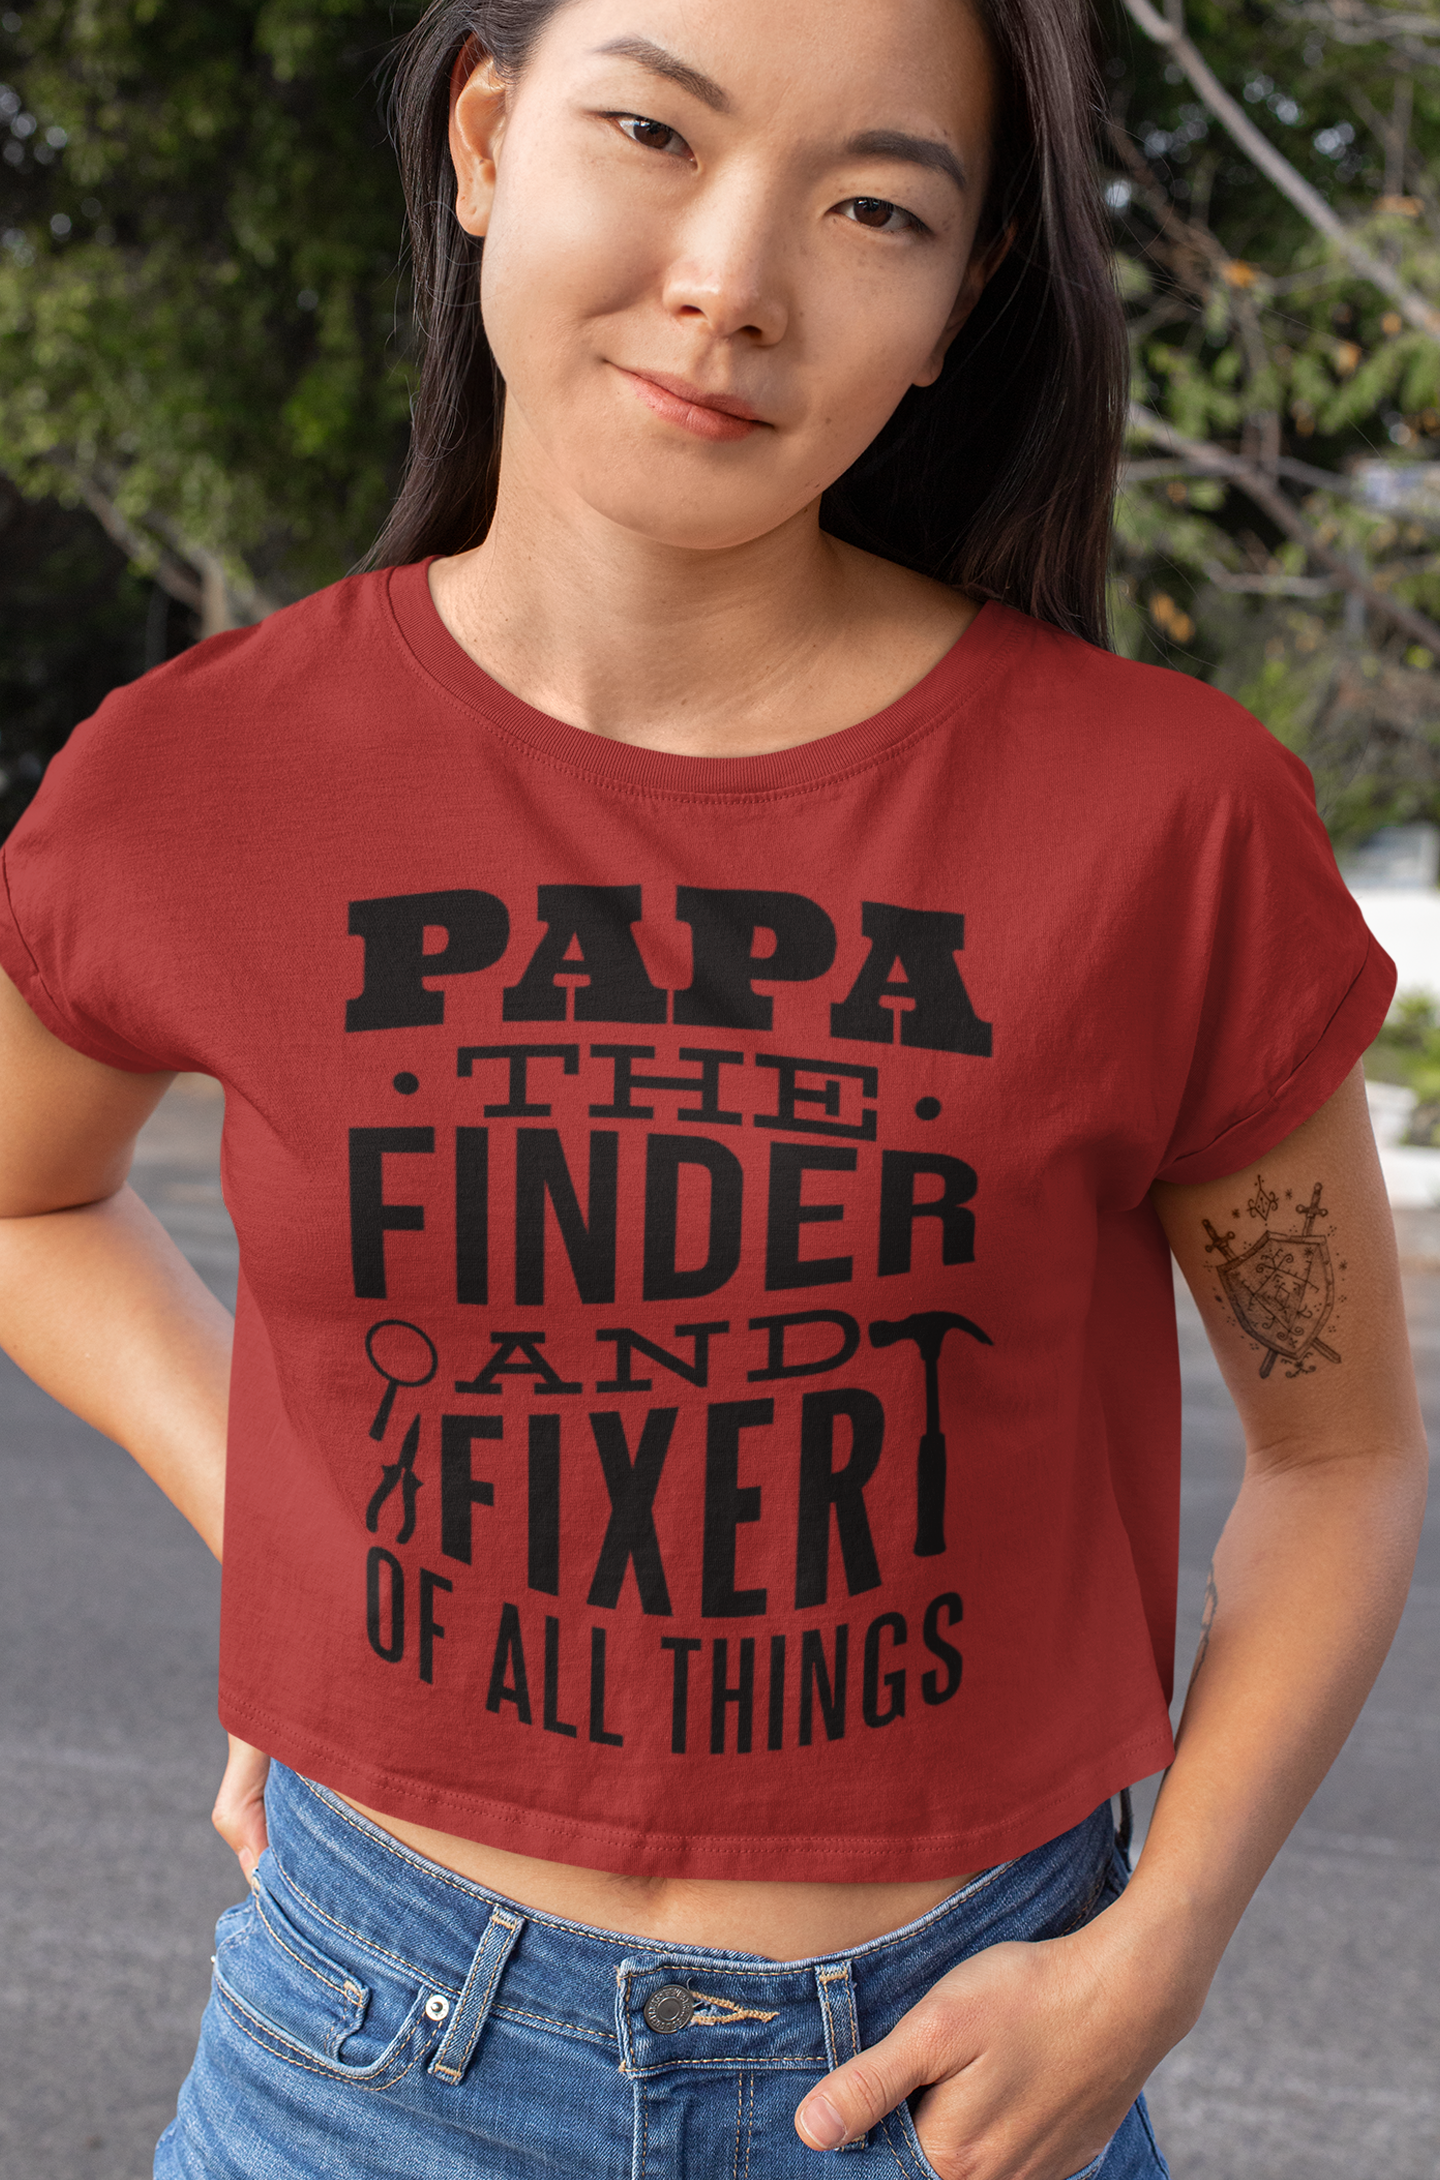 Papa the finder and fixer of all things Women Crop Top- FunkyTeesClub